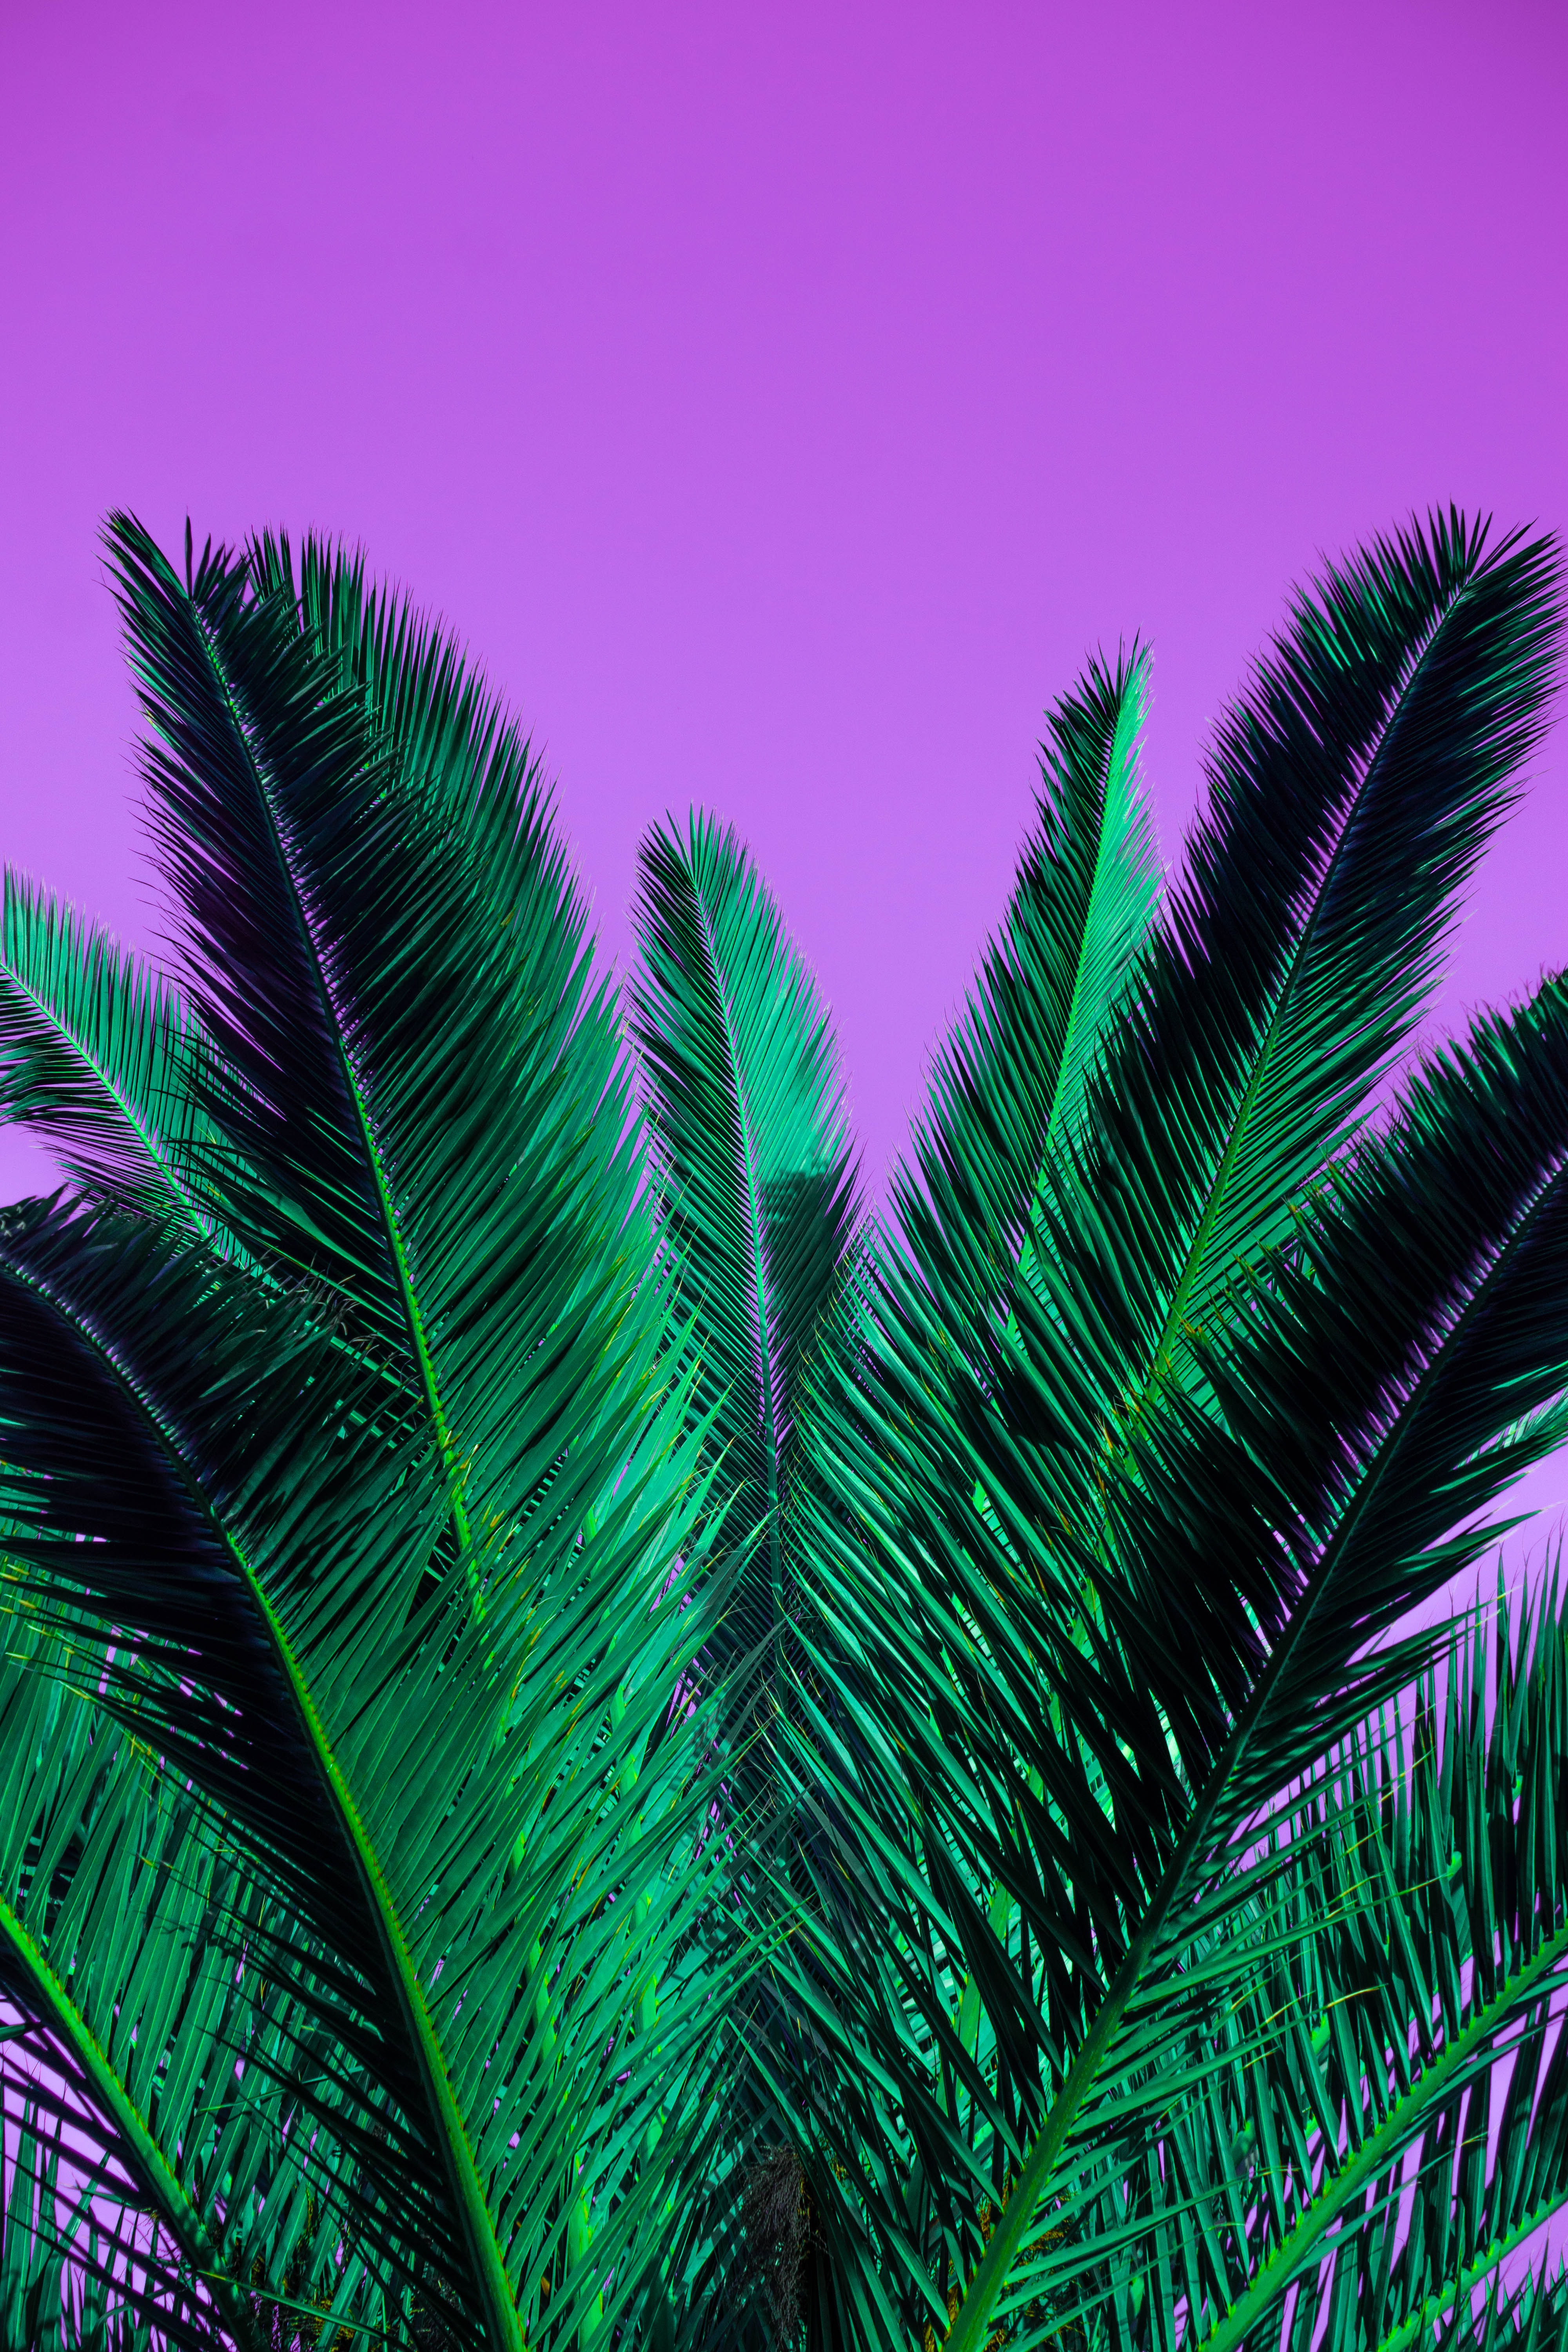 Mobile wallpaper: Palm, Branches, Branch, Leaves, Nature, Plant, Violet,  Purple, 126266 download the picture for free.